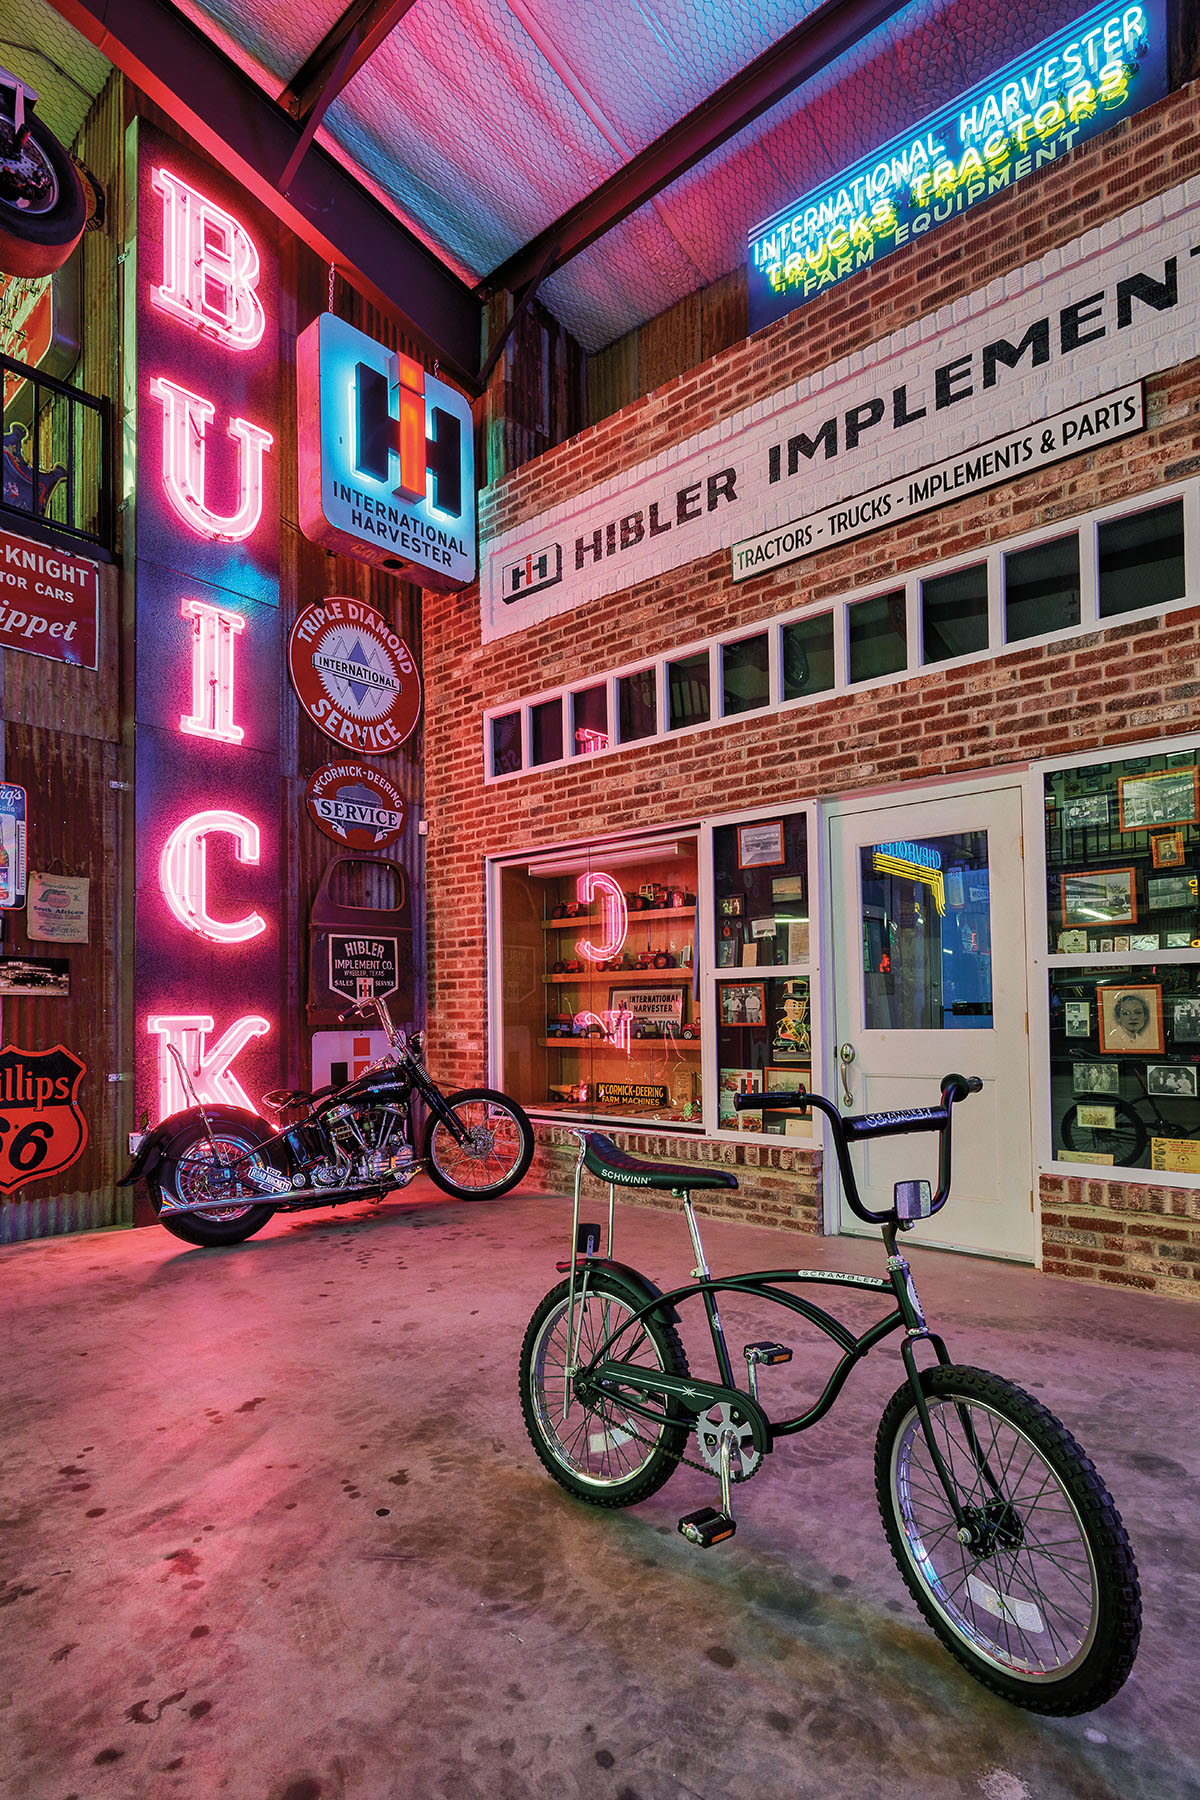 A small bicycle next to a motorcycle inside of a richly decorated auto showroom, with a neon sign reading "BUICK"